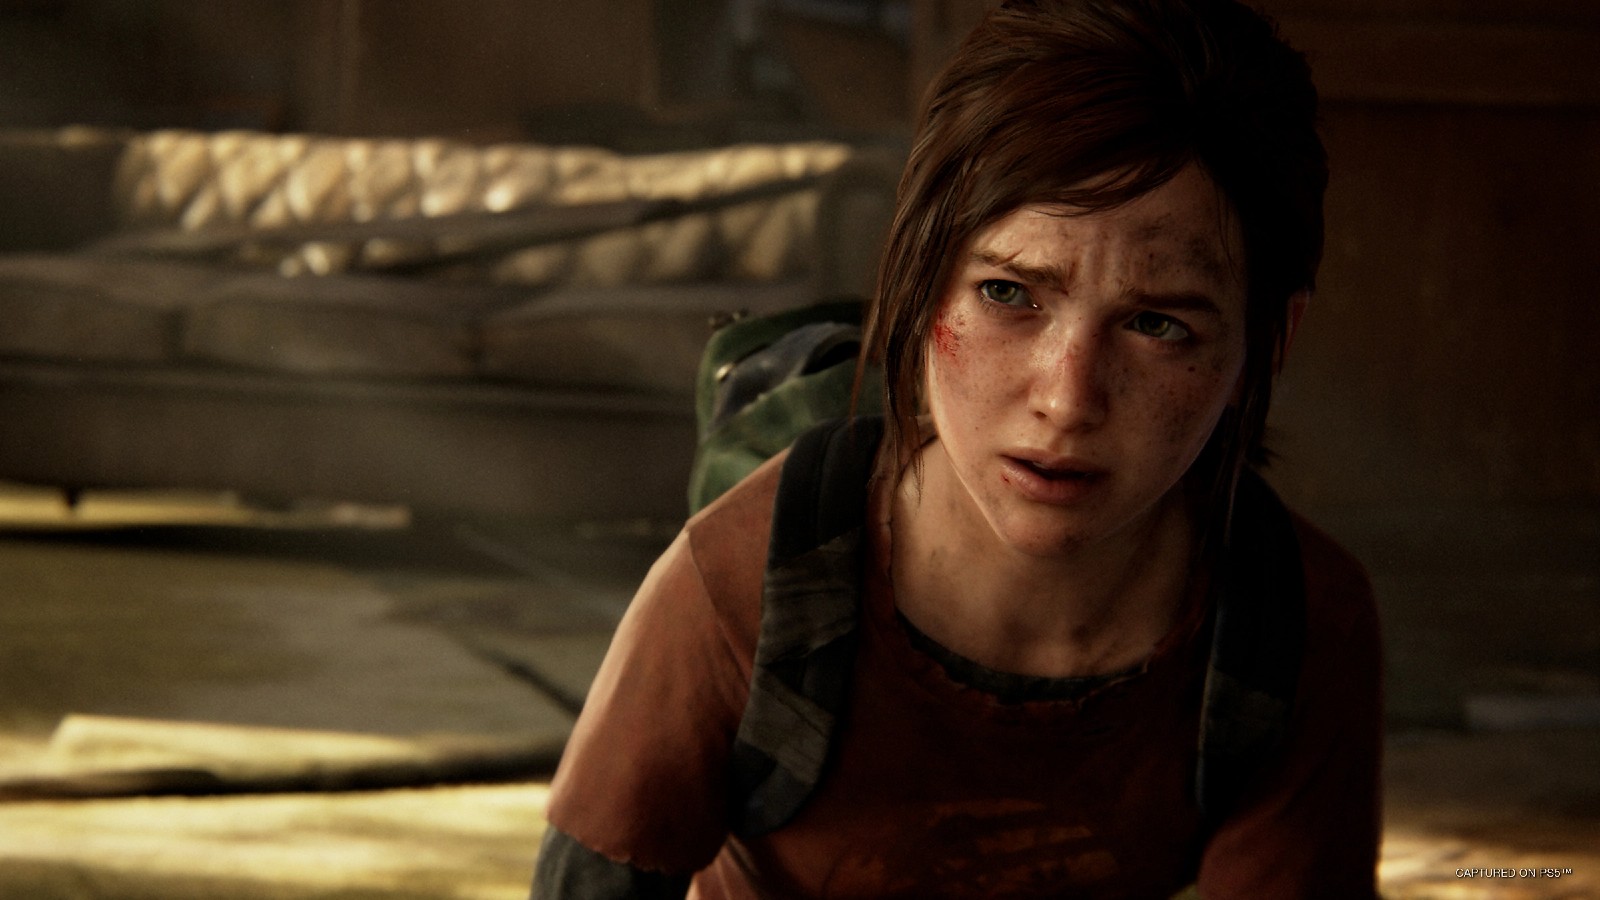 Long awaited “The Last of US” makes HBO debut - The Daily